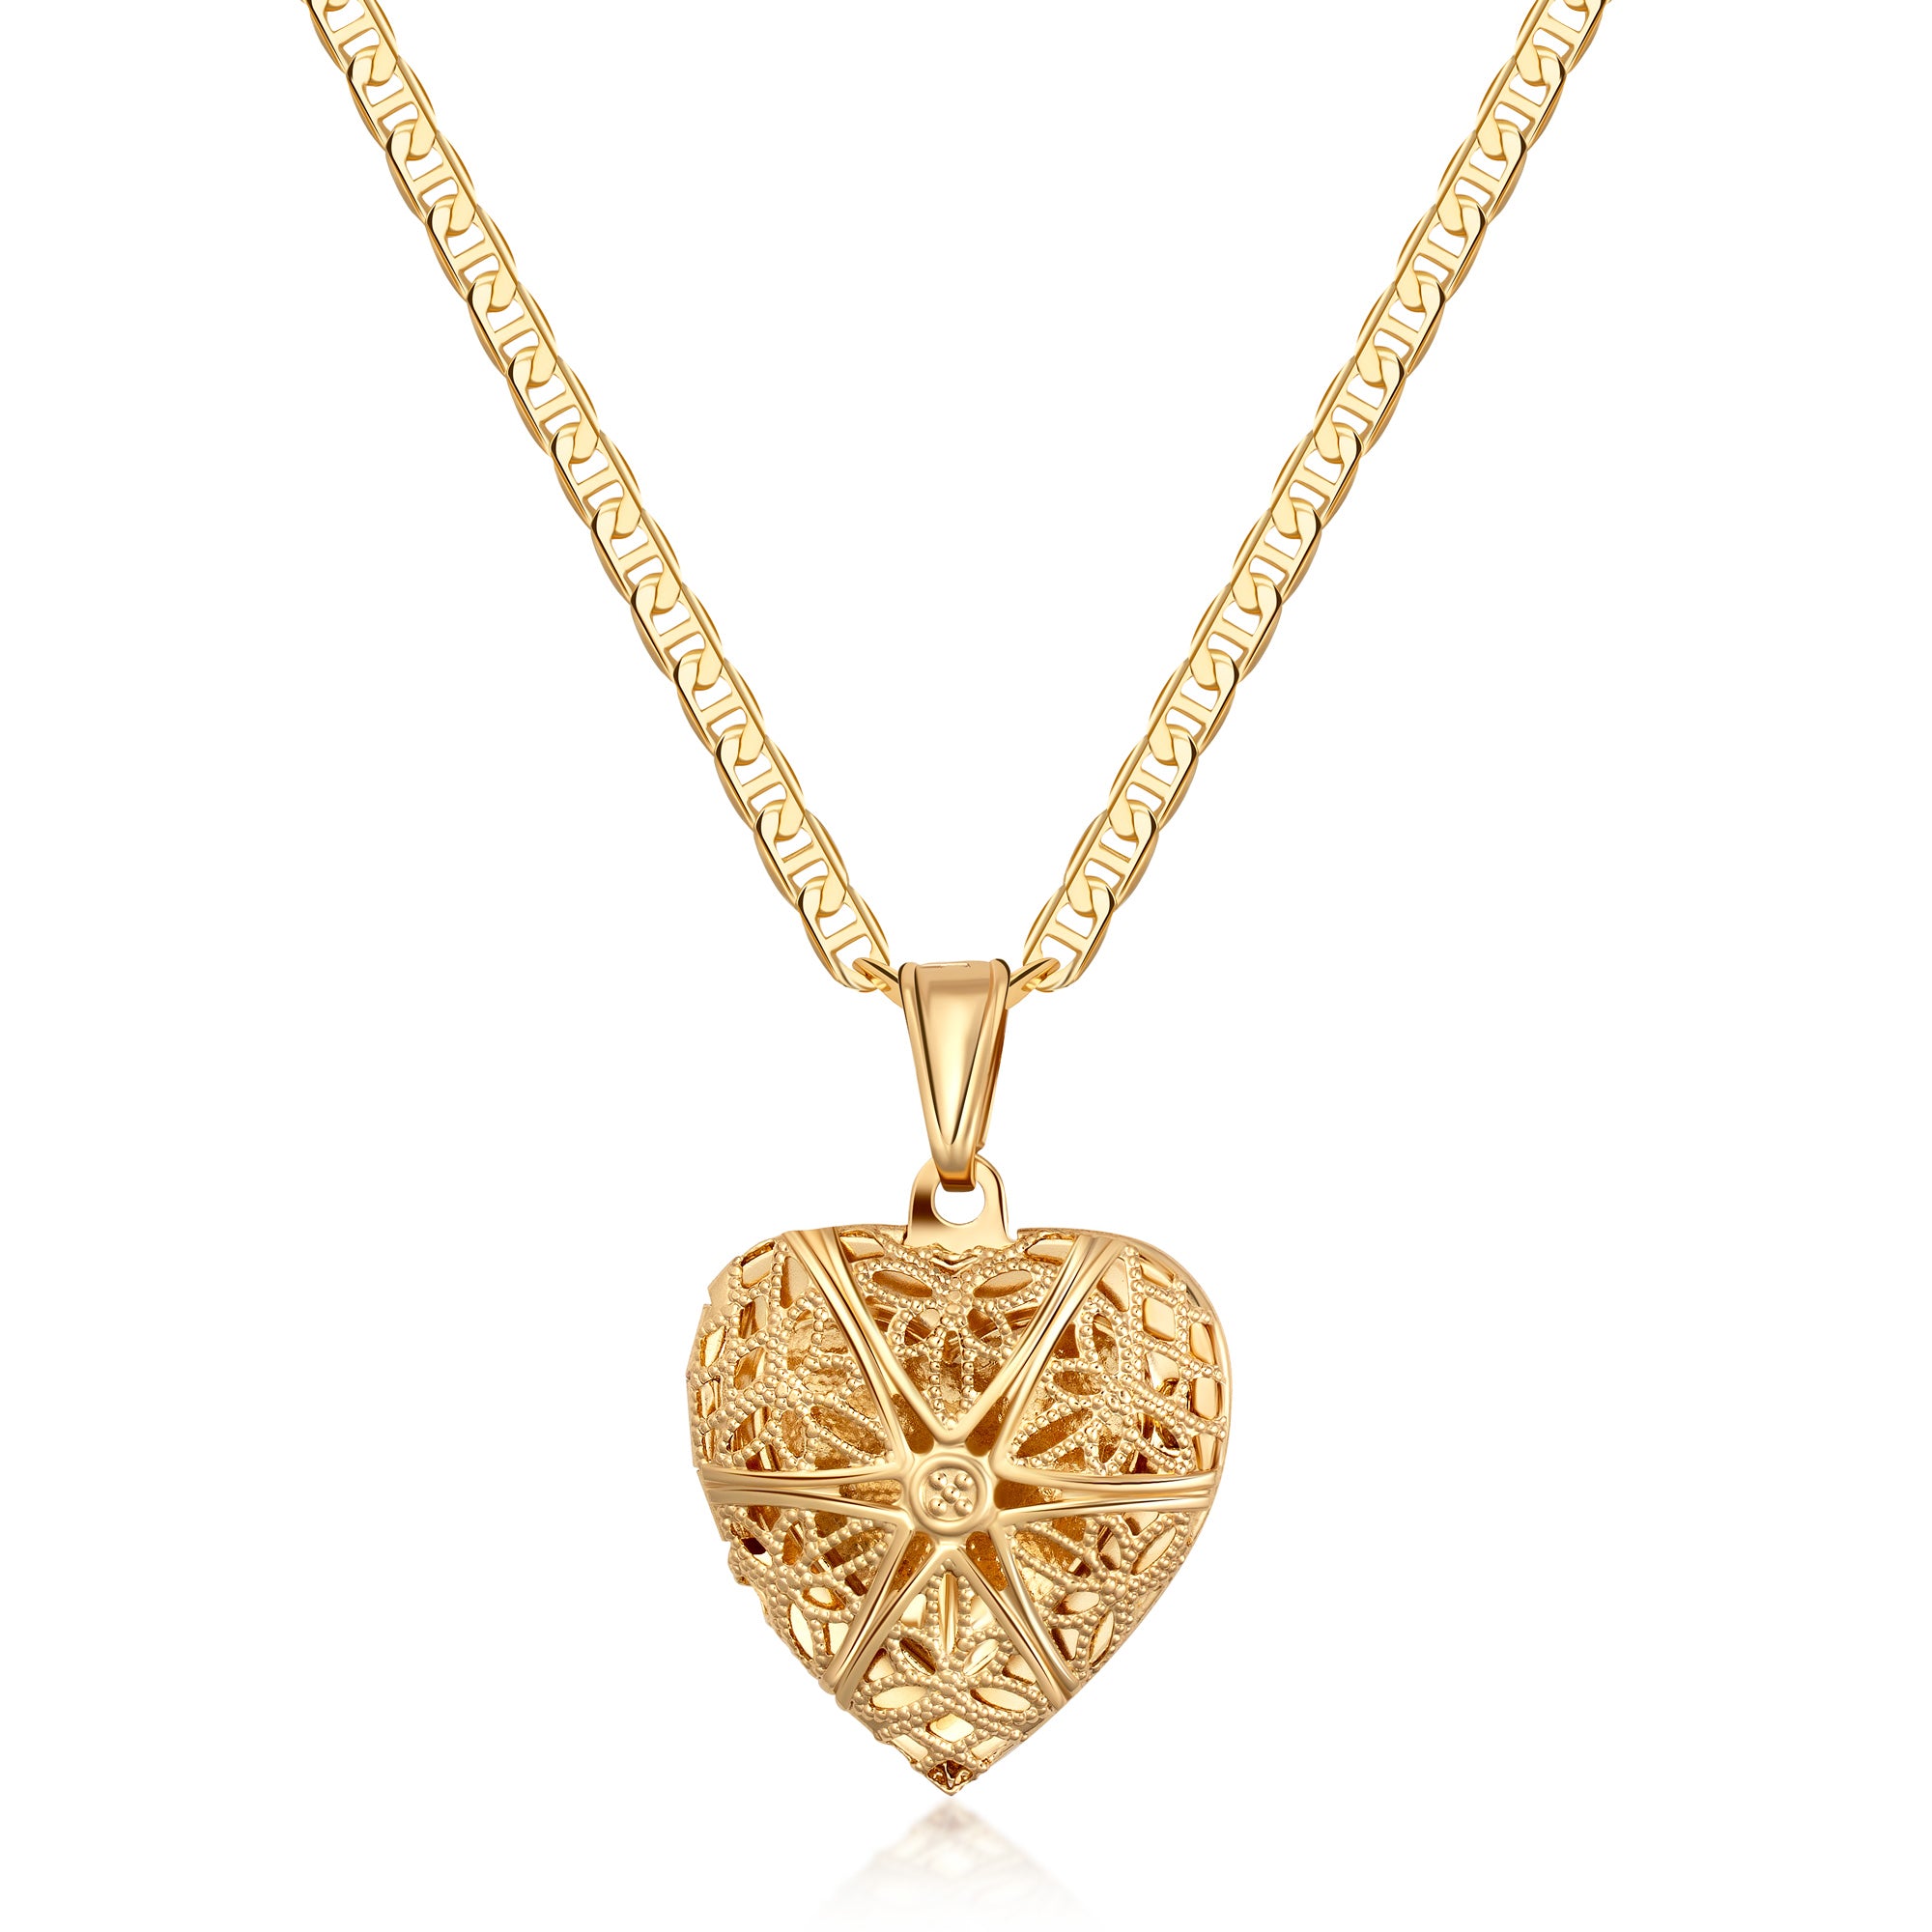 18k Gold Plated Filigree Heart Locket Pendant with Mariner Chain Necklace